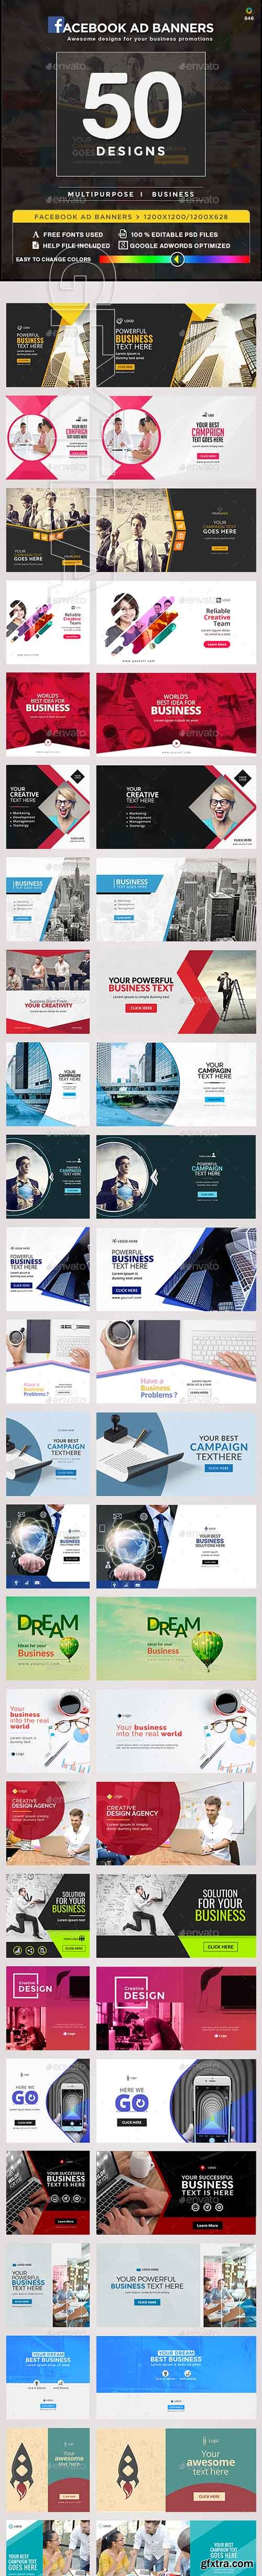 GraphicRiver - FB Newsfeed Ad Banners - 50 Designs 20677597